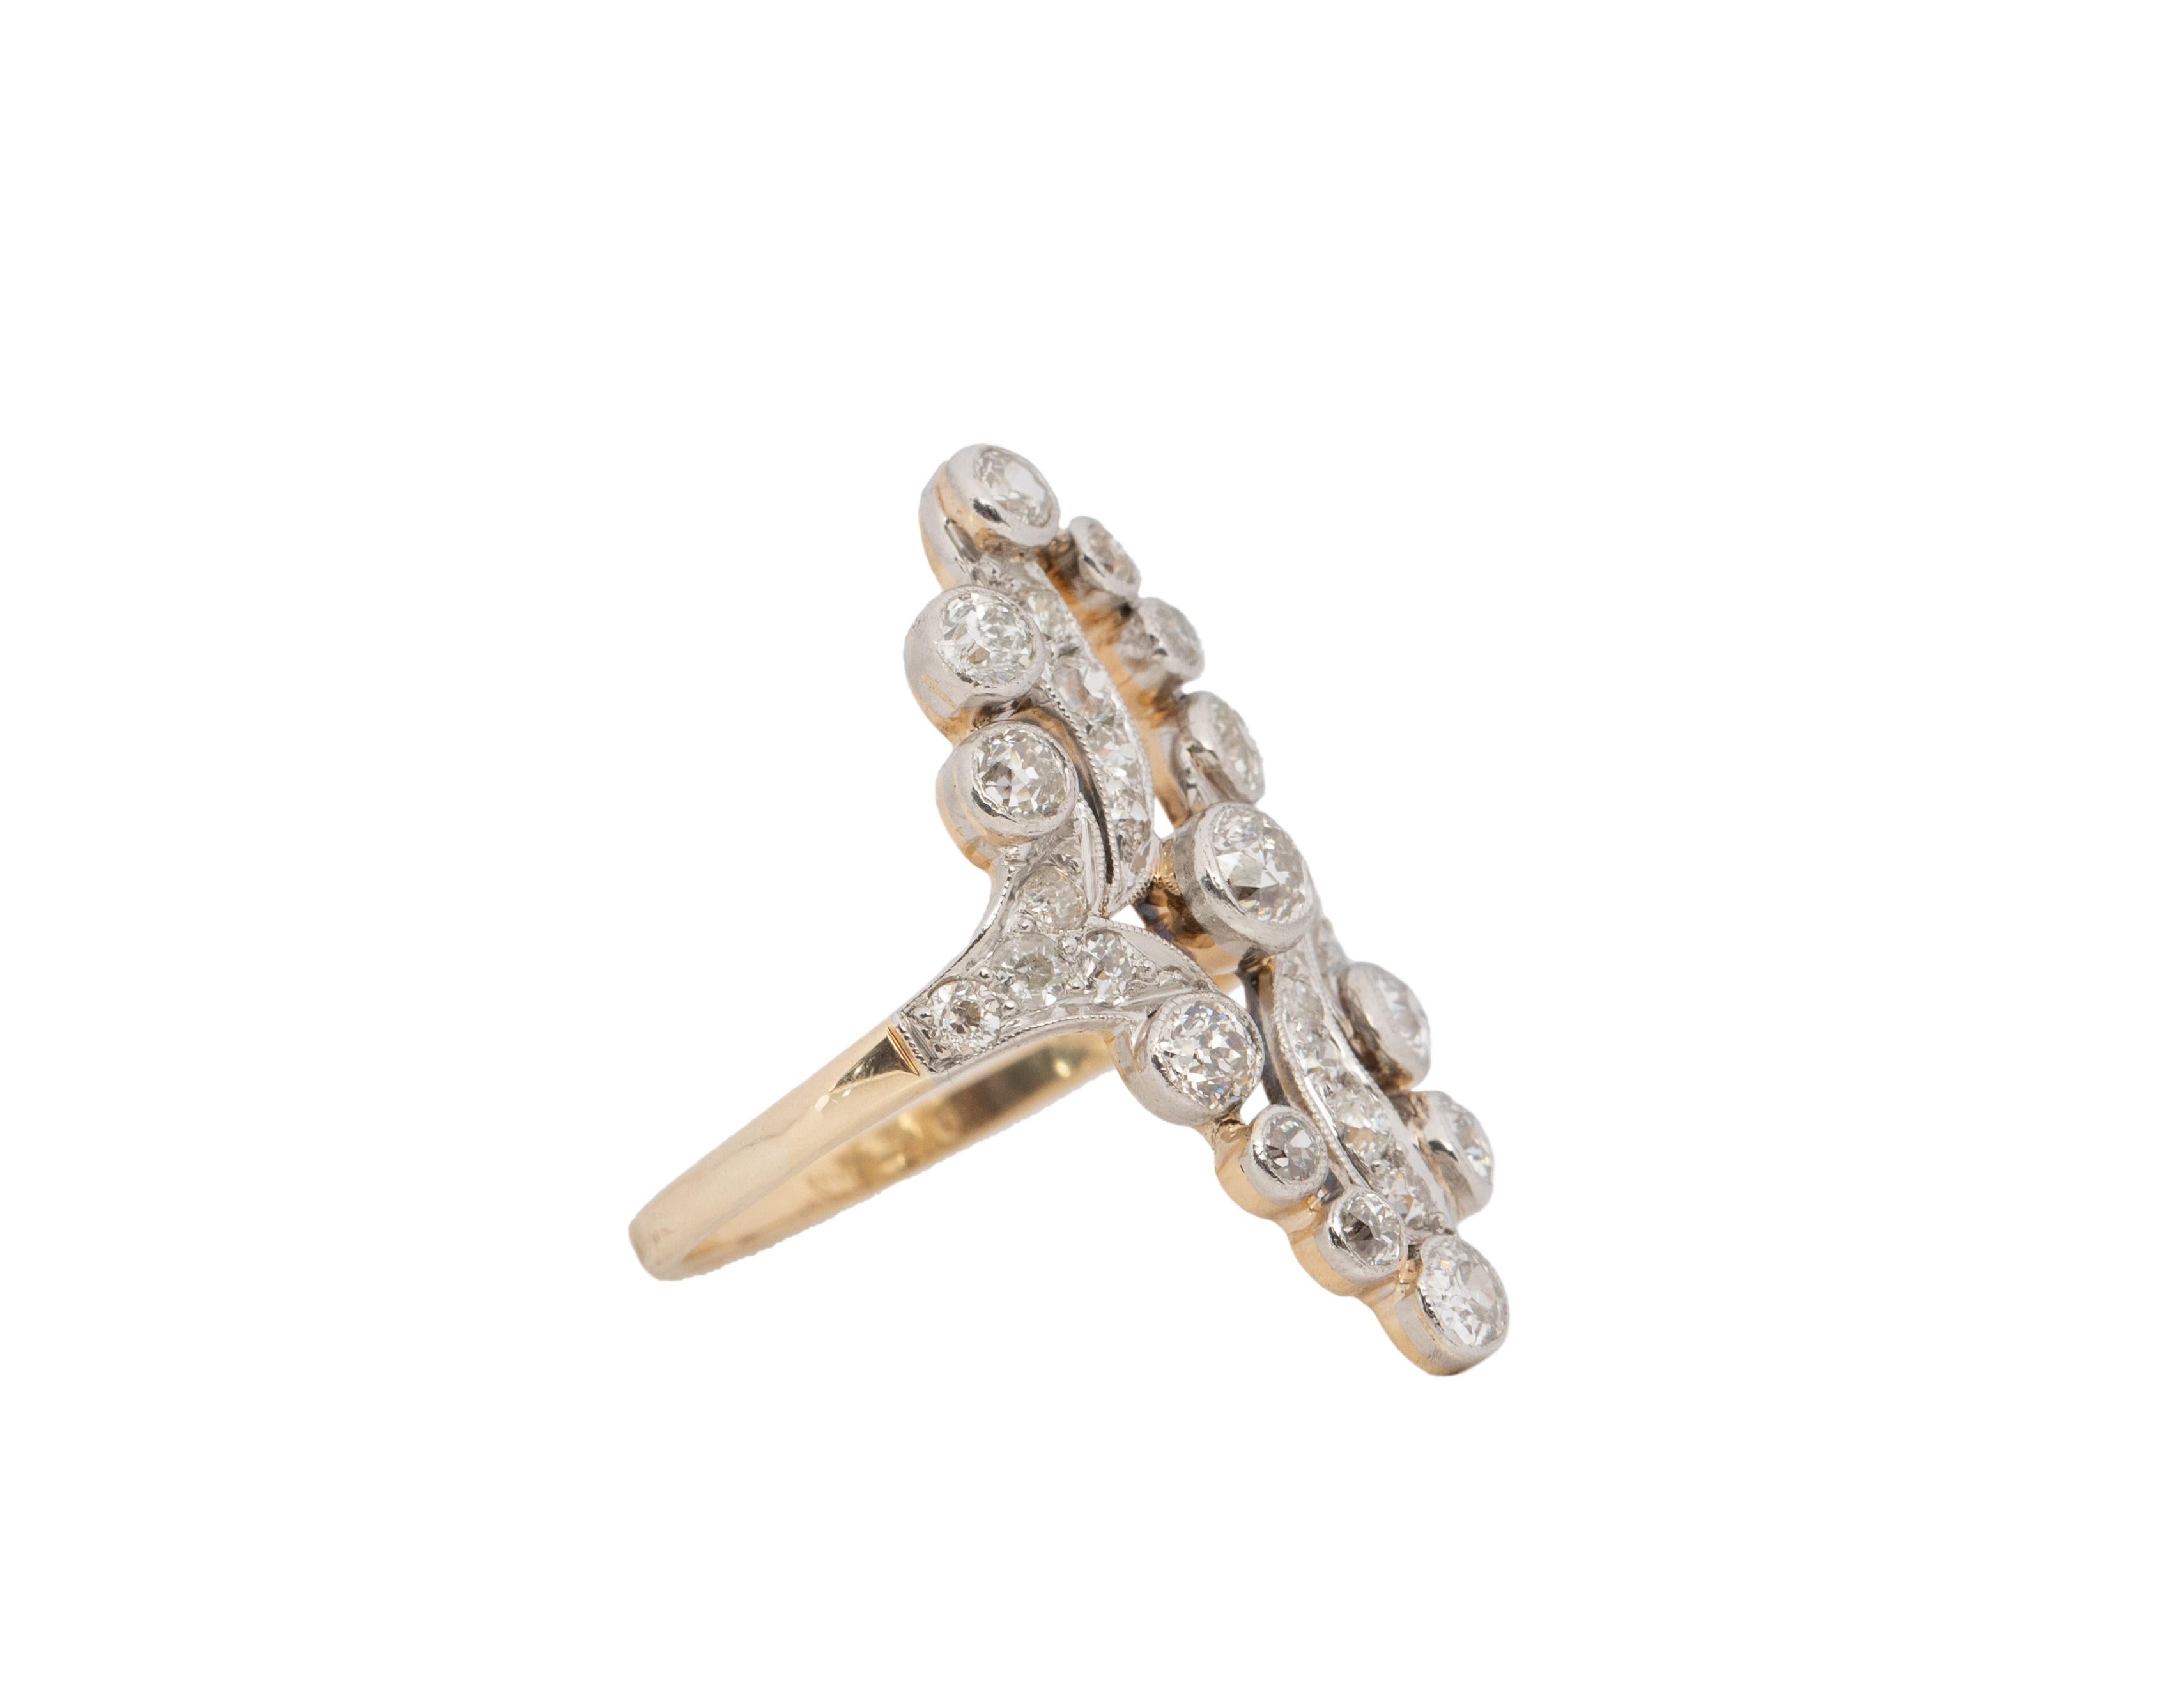 Ring Size:9
Metal Type: 14K Yellow Gold and Platinum Top [Hallmarked, and Tested]
Weight: 5.9 grams

Diamond Details:
Weight: 1.75ct, total weight
Cut: Old European brilliant
Color: G-H
Clarity: VS

Finger to Top of Stone Measurement: